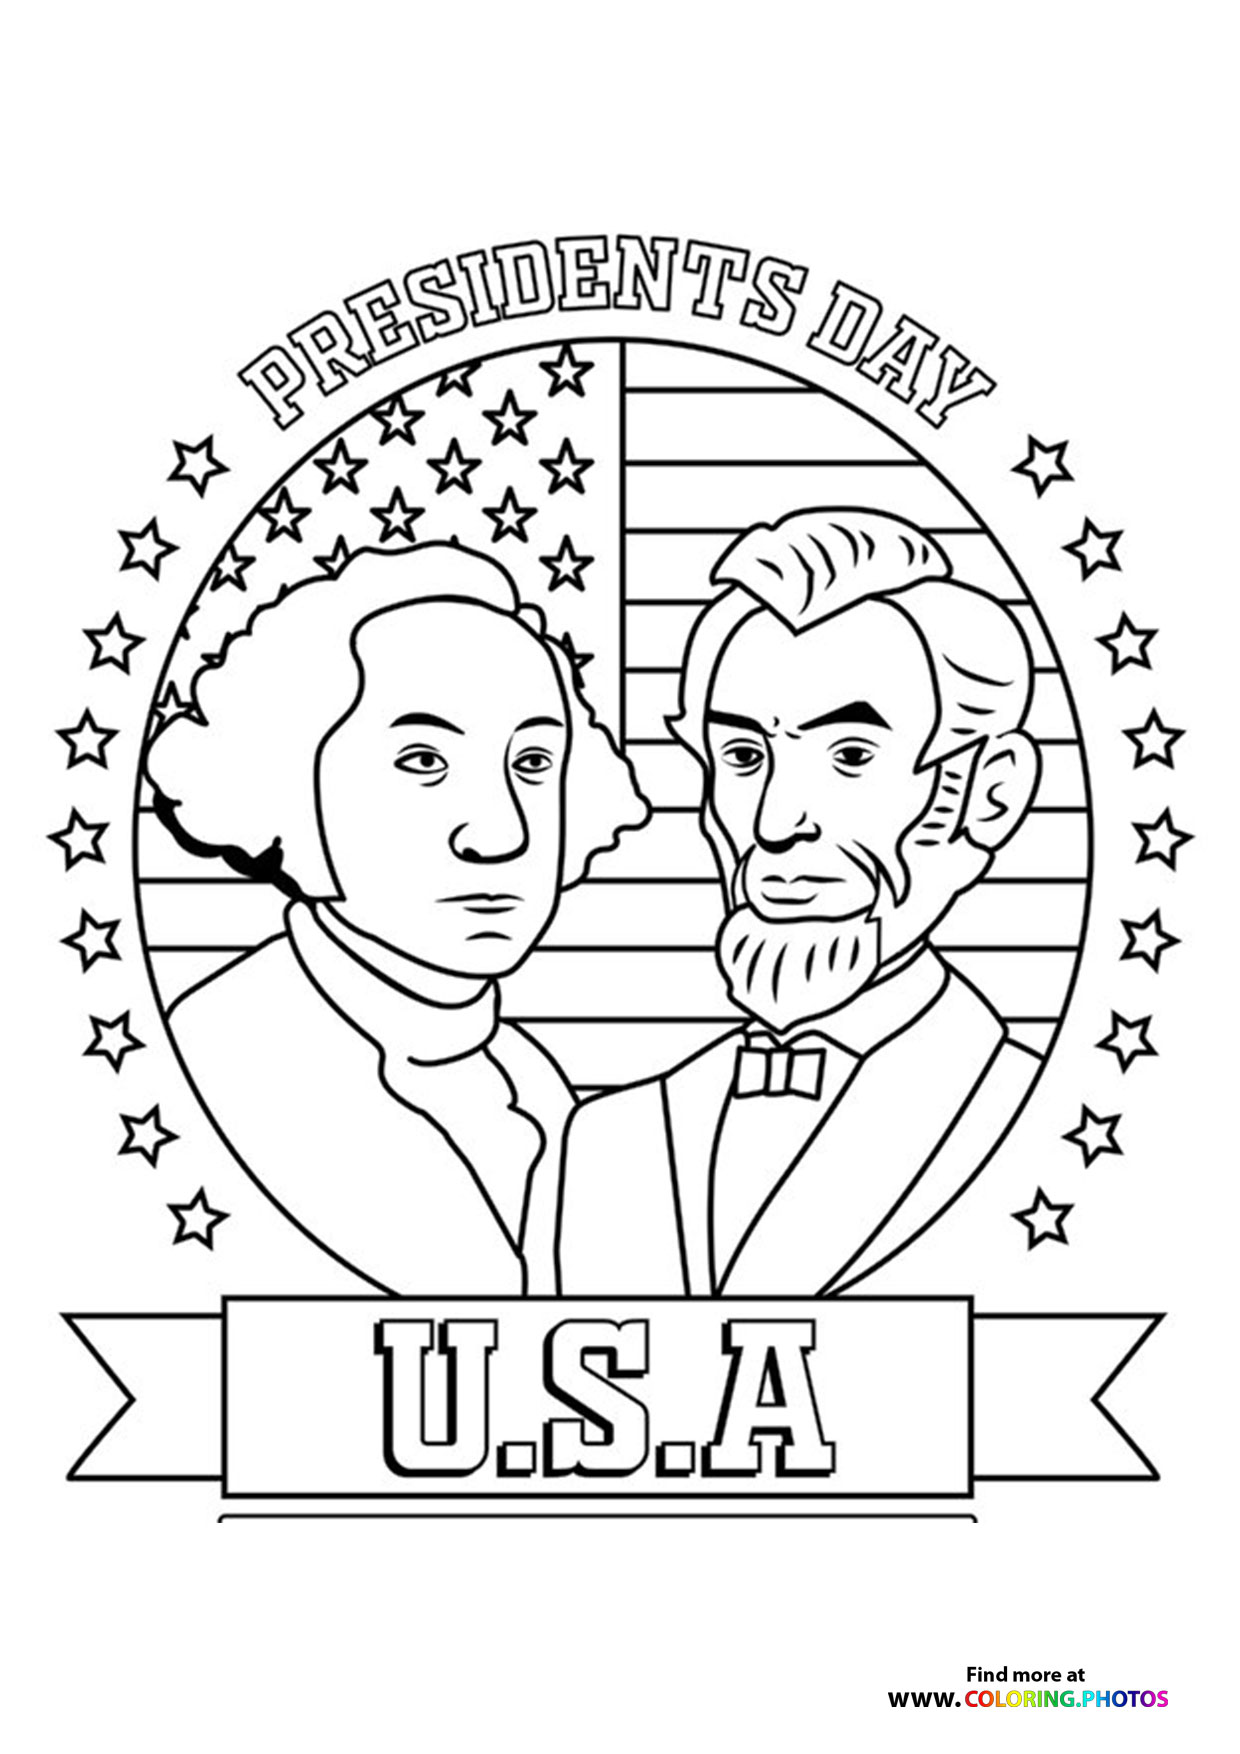 Presidents day - Coloring Pages for kids | Free and easy print or download